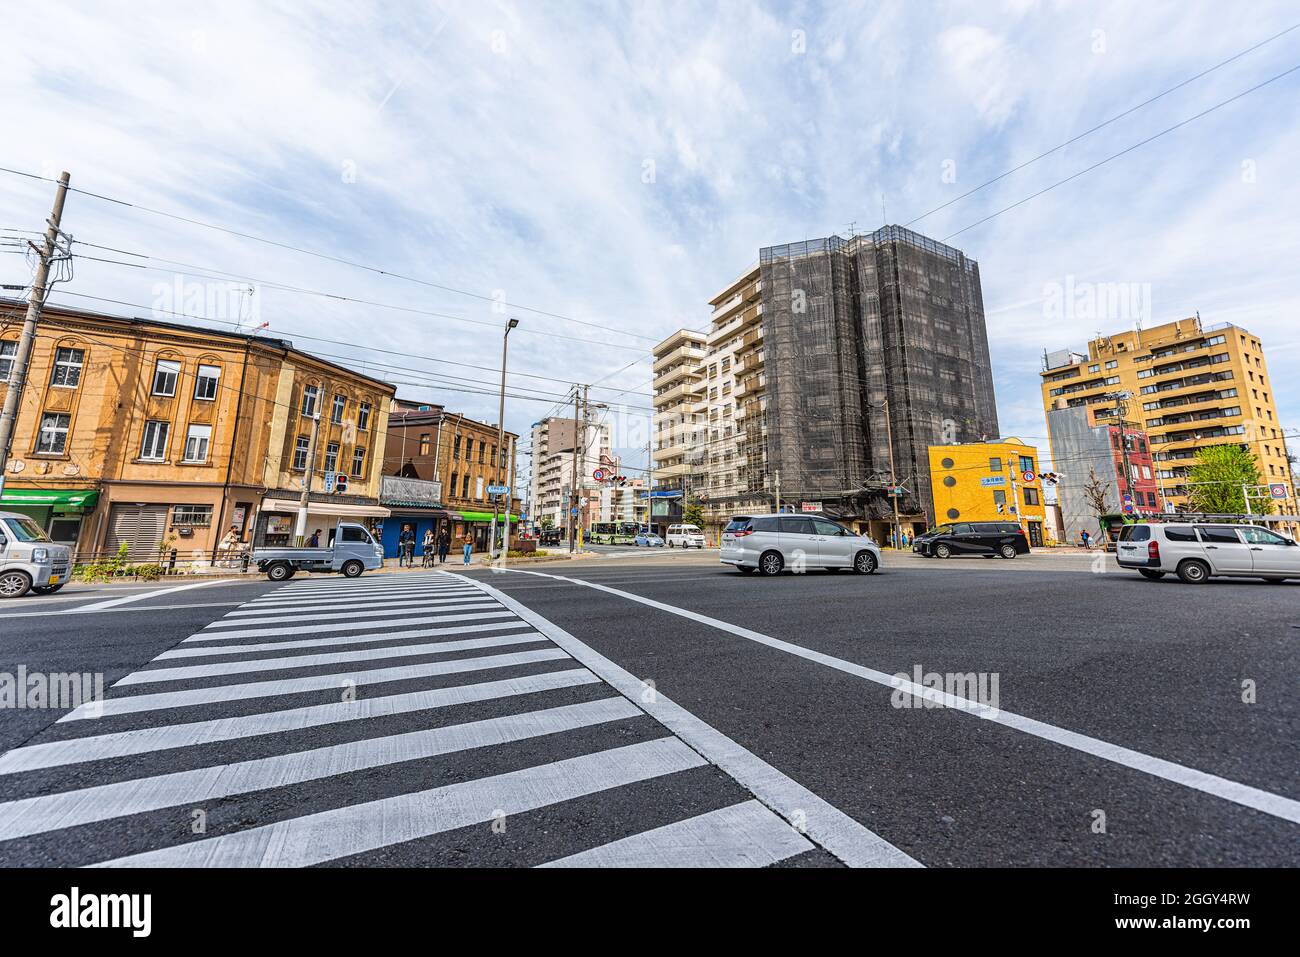 Kyoto, Japan - April 16, 2019: City street crossing crosswalk wide angle view during sunny day morning near train station with traffic Stock Photo